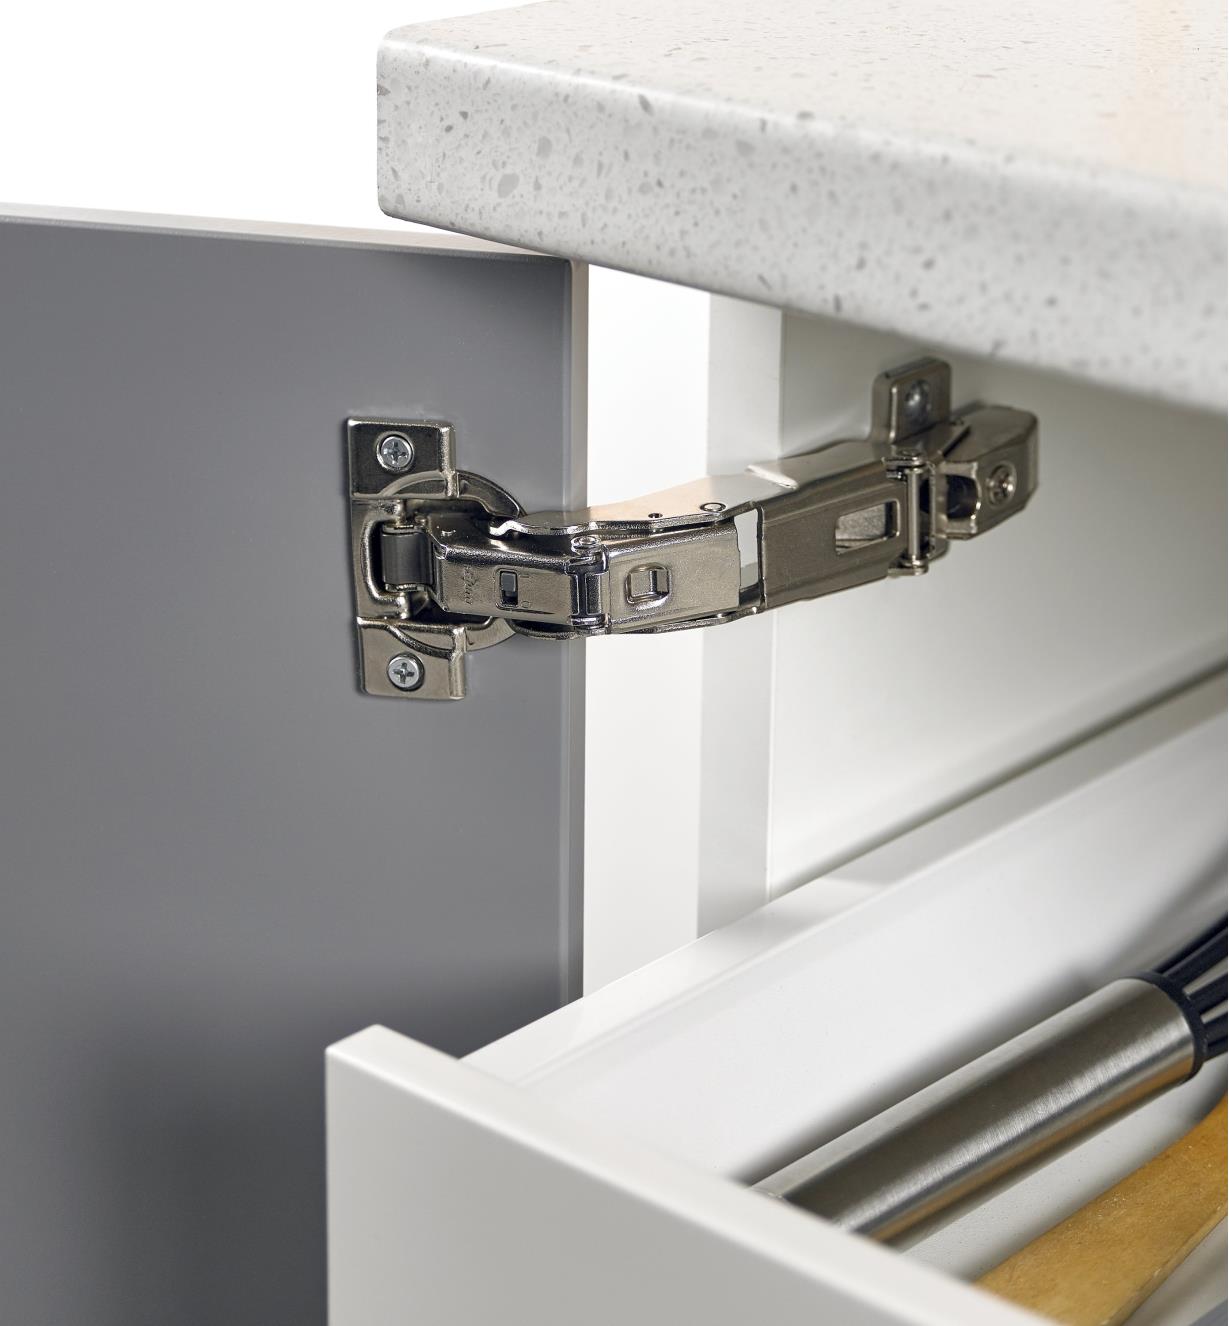 A door with a Blum standard 155° zero-protrusion  soft-close clip-top overlay hinge clears the cabinet to permit roll-outs